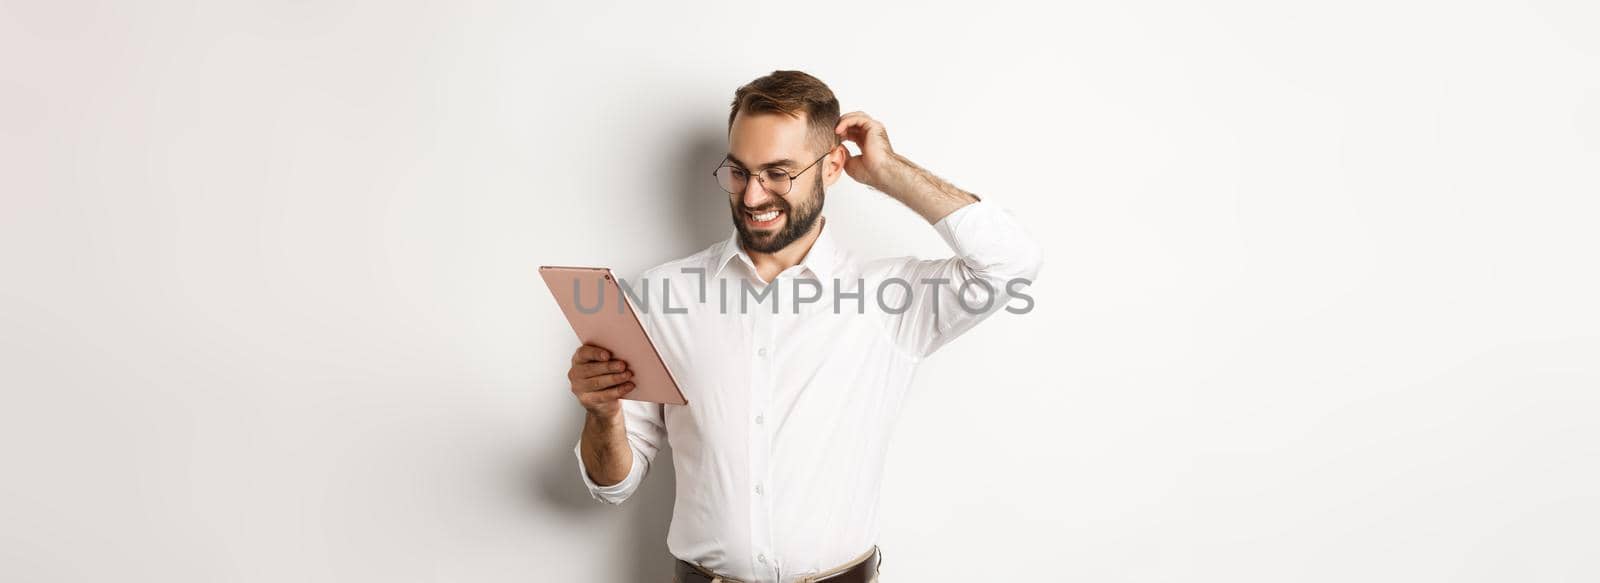 Confused male manager looking puzzled at digital tablet, scratching head doubtful, standing over white background.